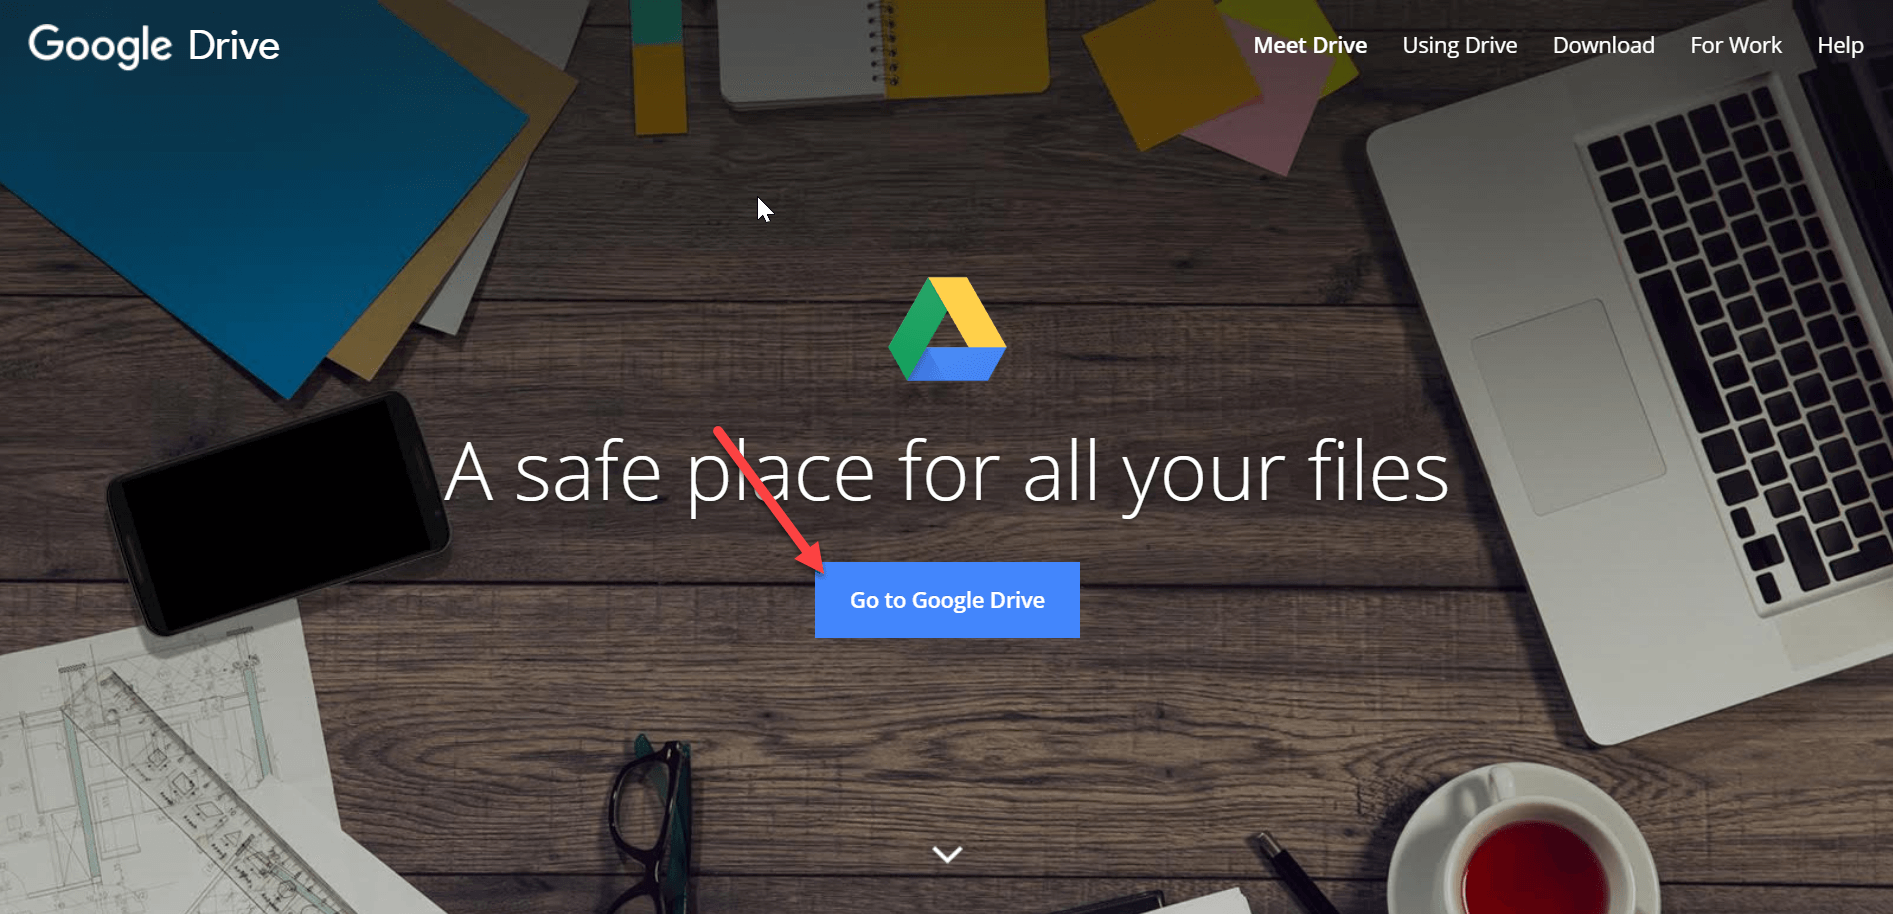 Navigate to Cloud Services website like  Google Drive on your web browser